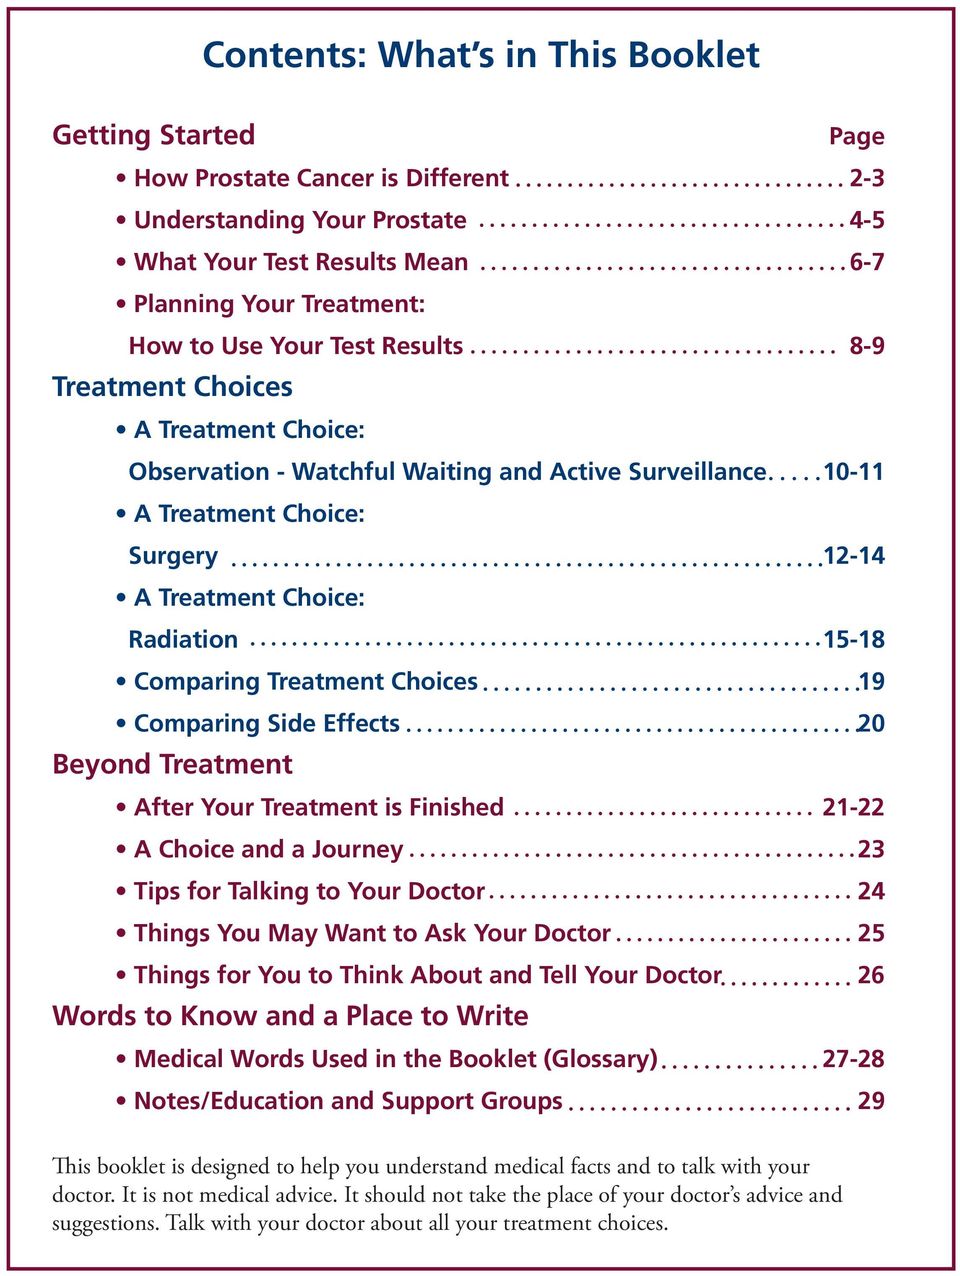 Treatment Choices 19 Comparing Side Effects 20 Beyond Treatment After Your Treatment is Finished 21-22 A Choice and a Journey 23 Tips for Talking to Your Doctor 24 Things You May Want to Ask Your